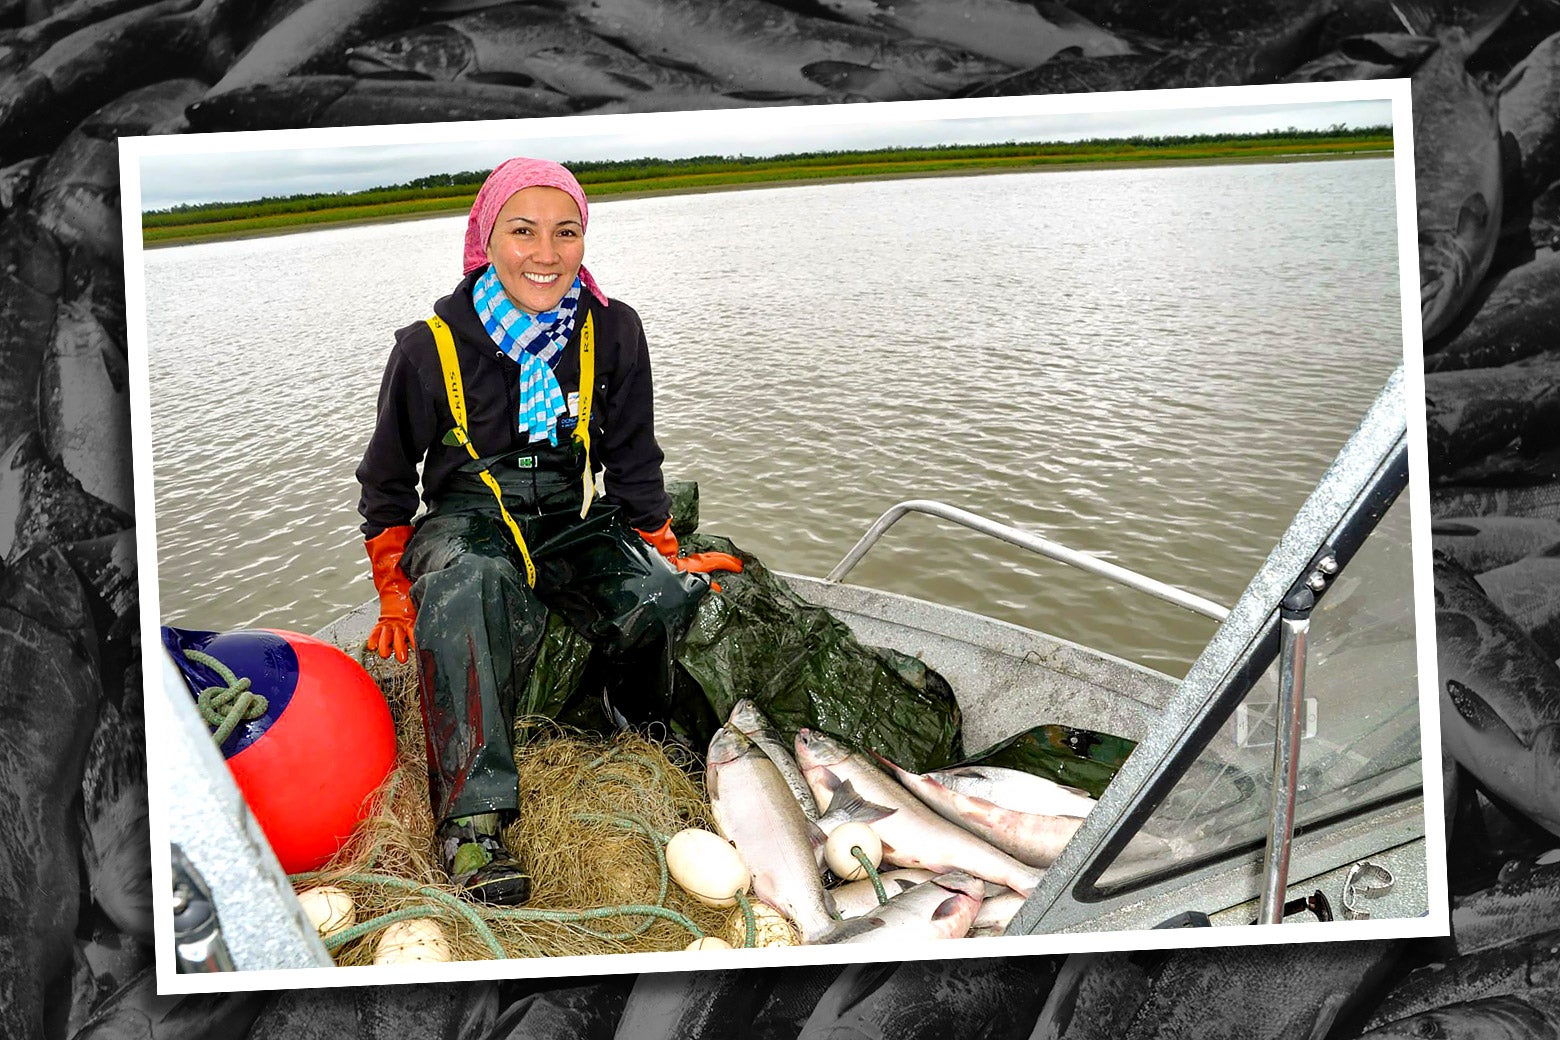 Mary Peltola sits smiling in a boat on the water, with a pile of fish at her feet.